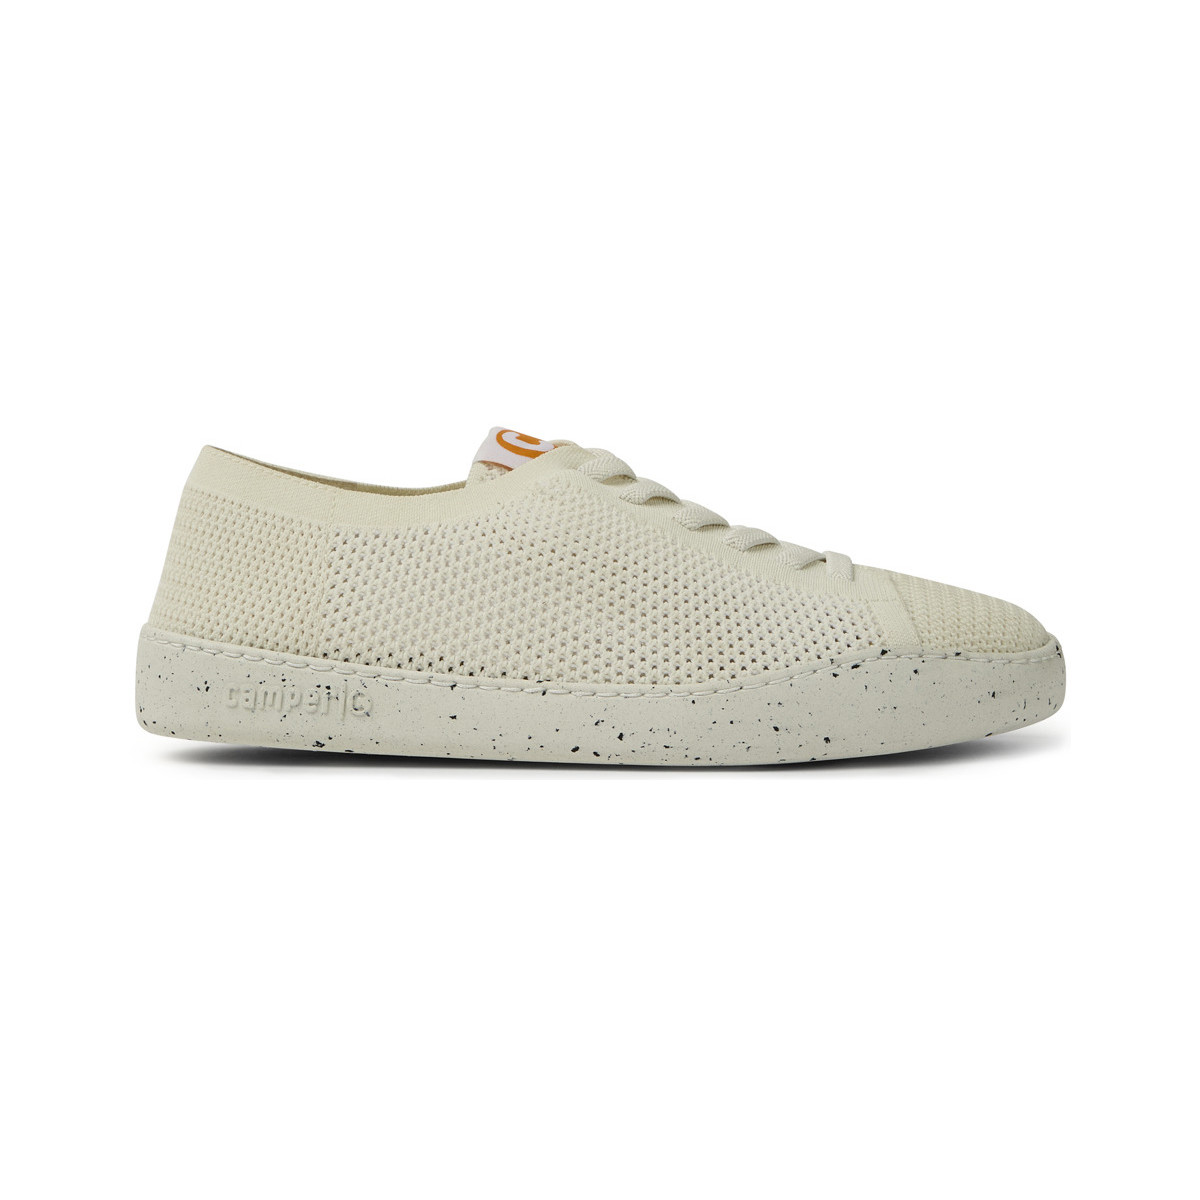 Chaussures Homme Baskets basses Camper CHAUSSURES  PEU TOURING K100816 Blanc